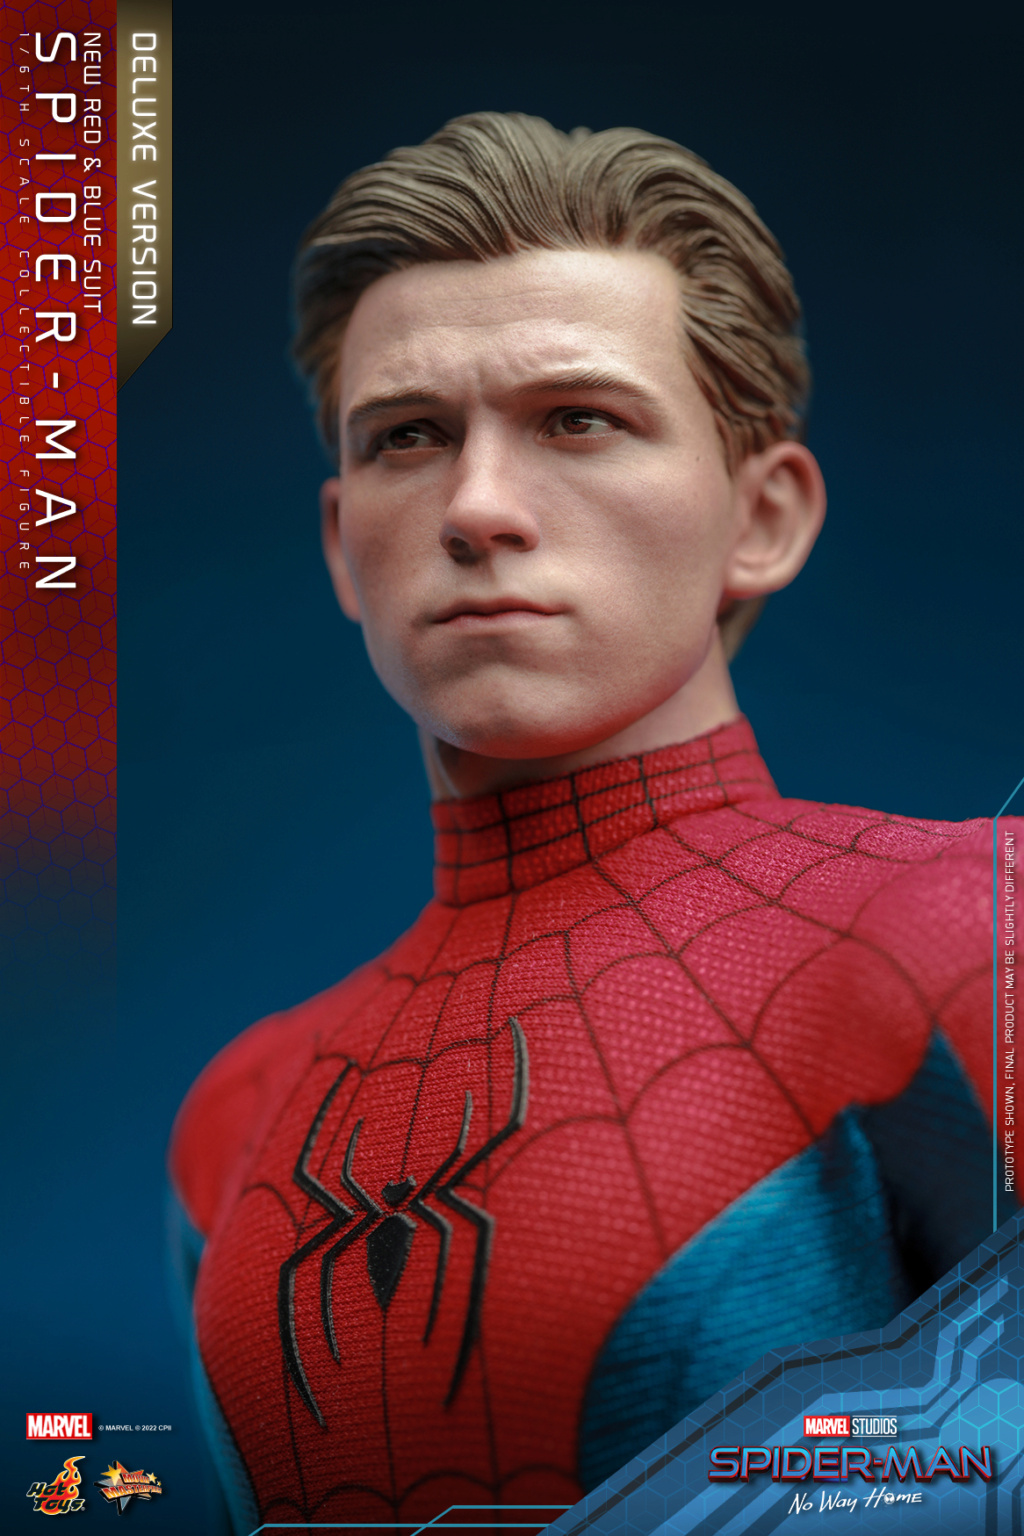 NoWayHome - NEW PRODUCT: HOT TOYS: SPIDER-MAN: NO WAY HOME SPIDER-MAN (NEW RED AND BLUE SUIT) 1/6TH SCALE COLLECTIBLE FIGURE (standard & deluxe) 42165910